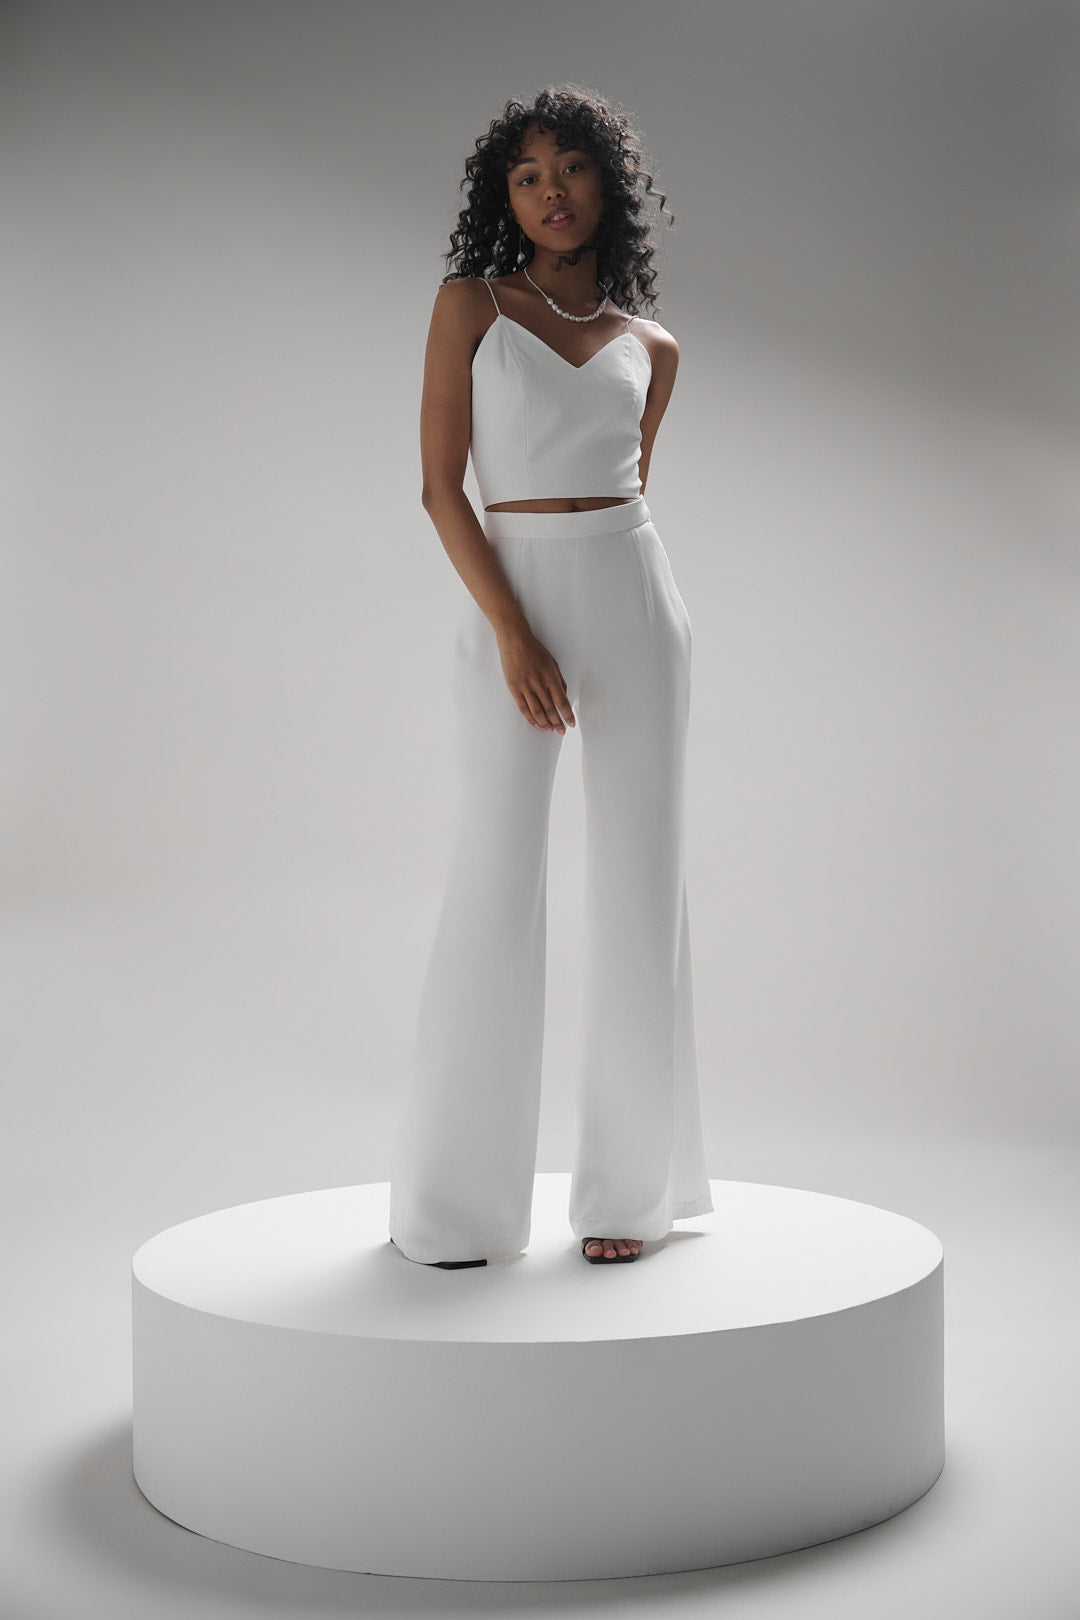 Giverny pants offer a universally flattering fit with a high natural waist, fitted hips, and flowy wide leg. Perfectly comfortable and chic for any modern bride.